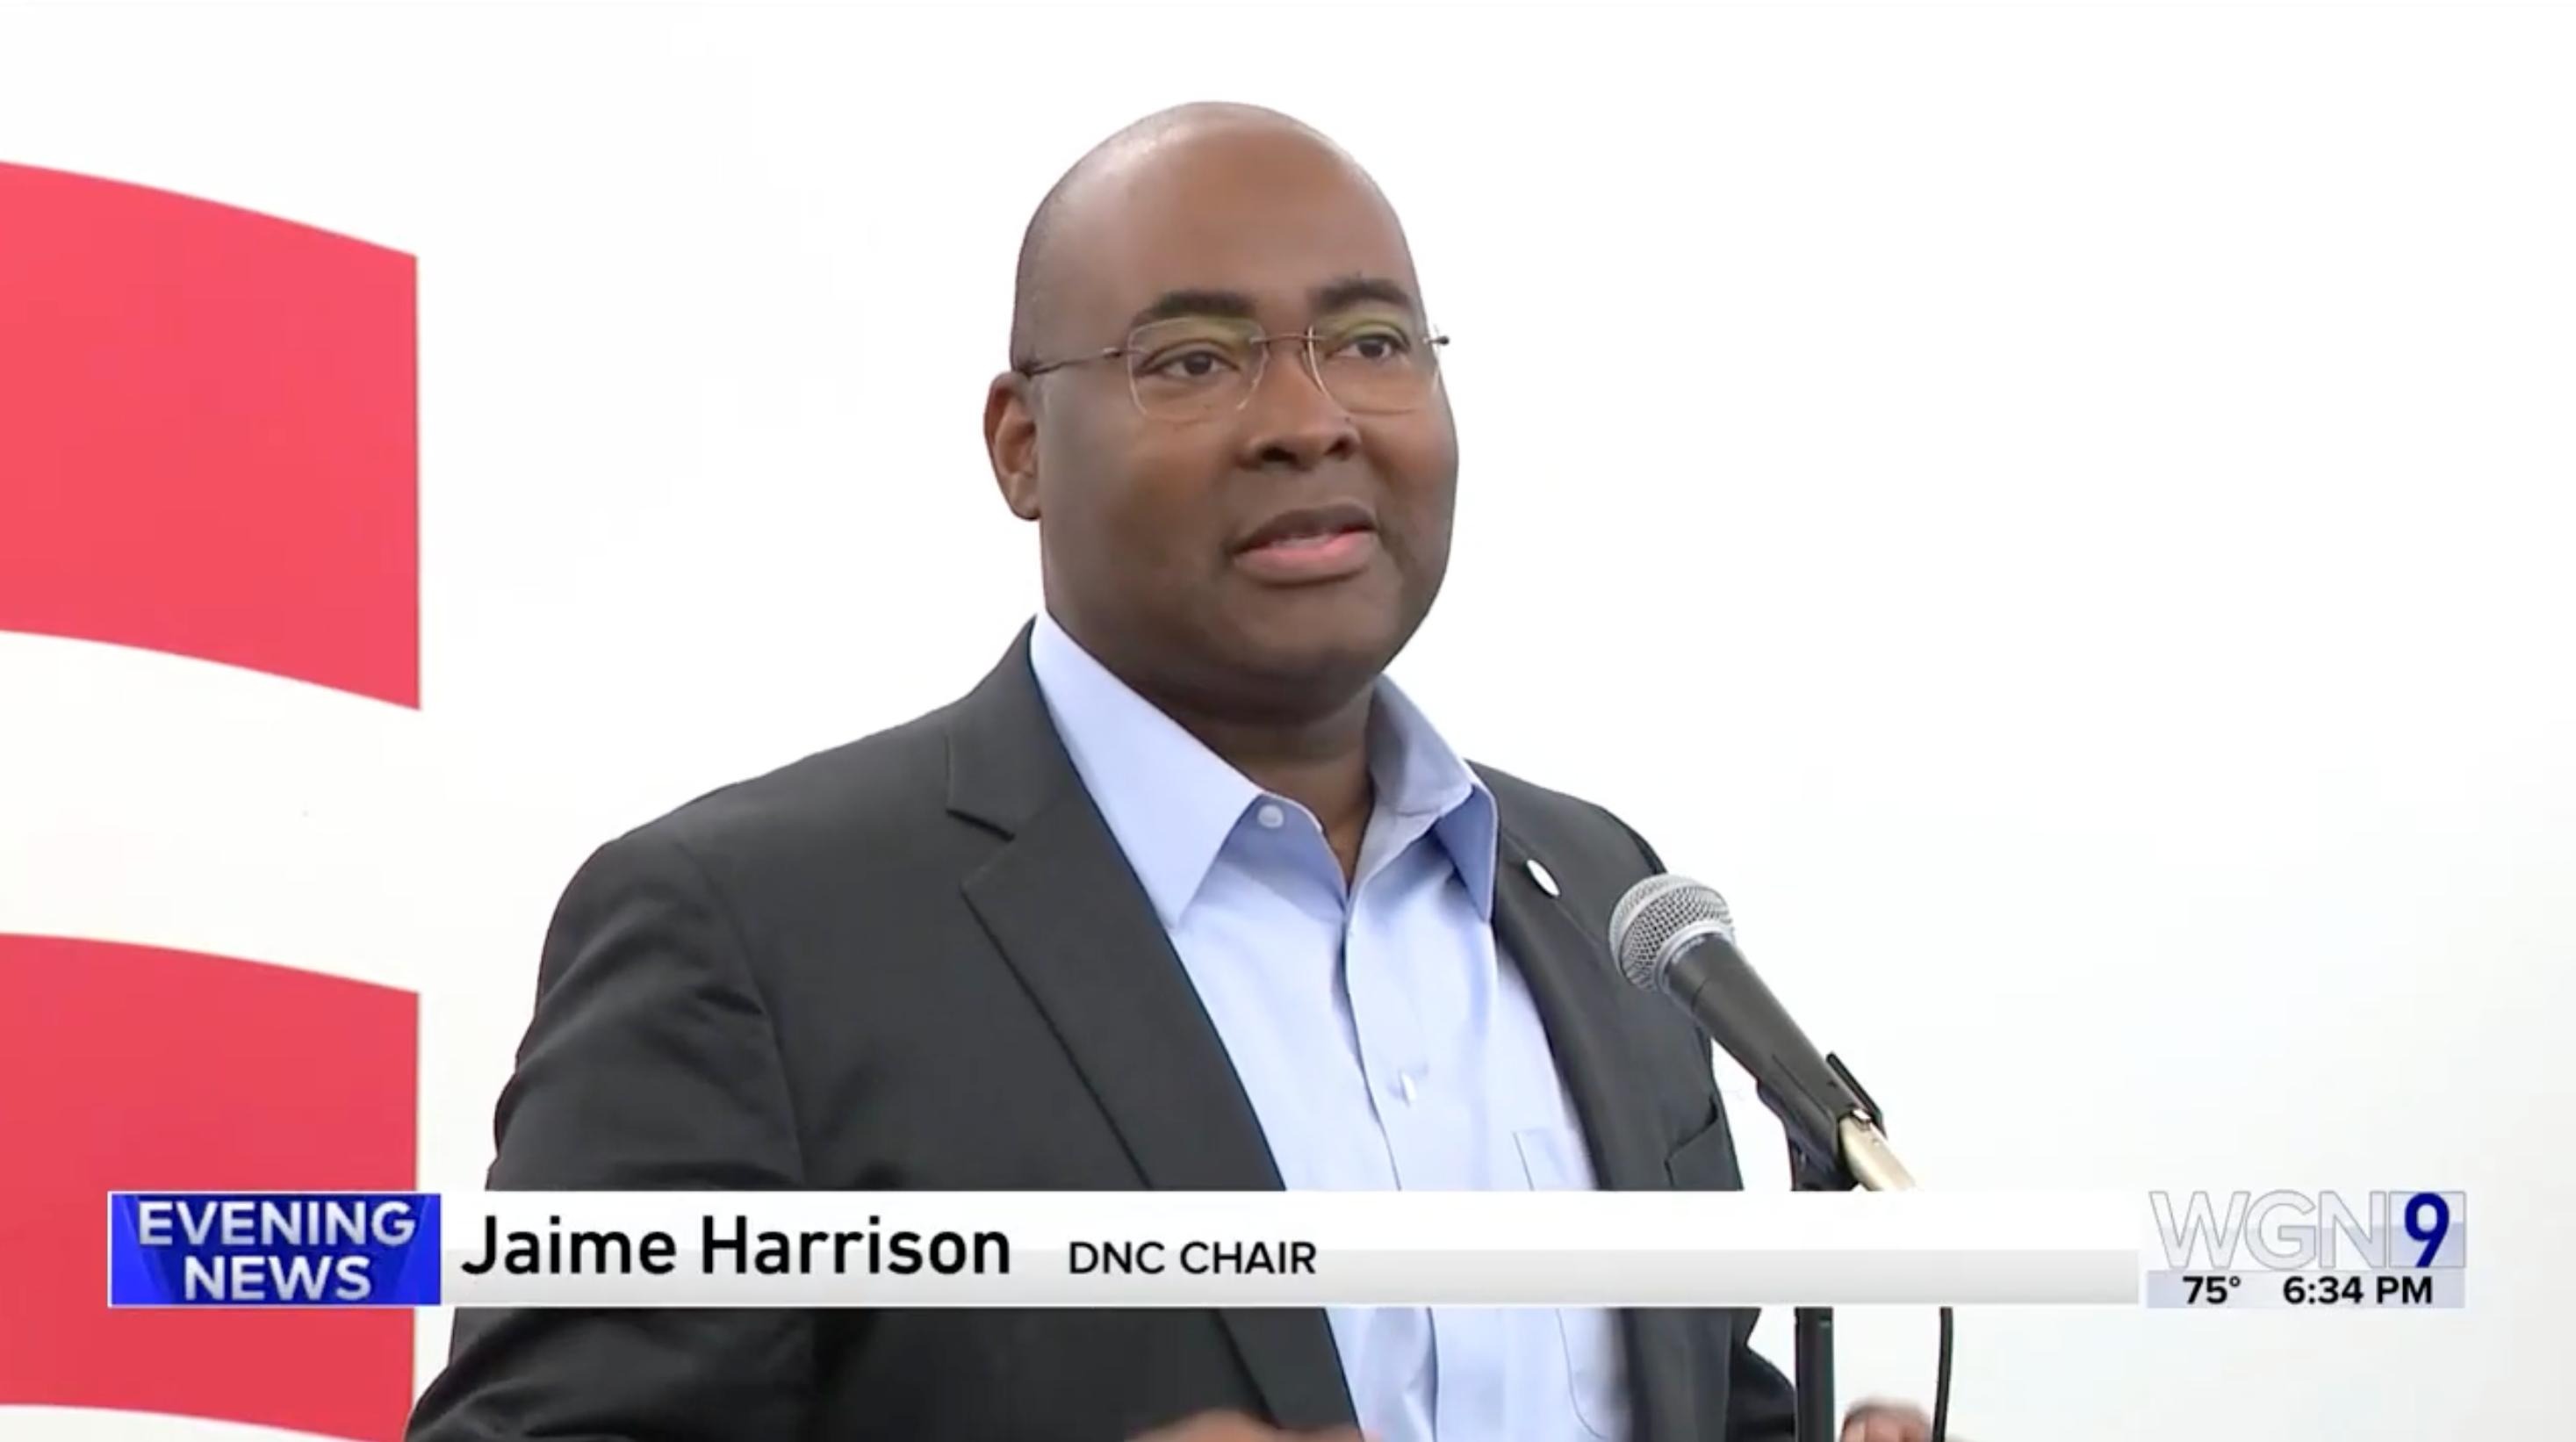 Screenshot from WGN's clip of Chair Jaime Harrison speaking to crowd